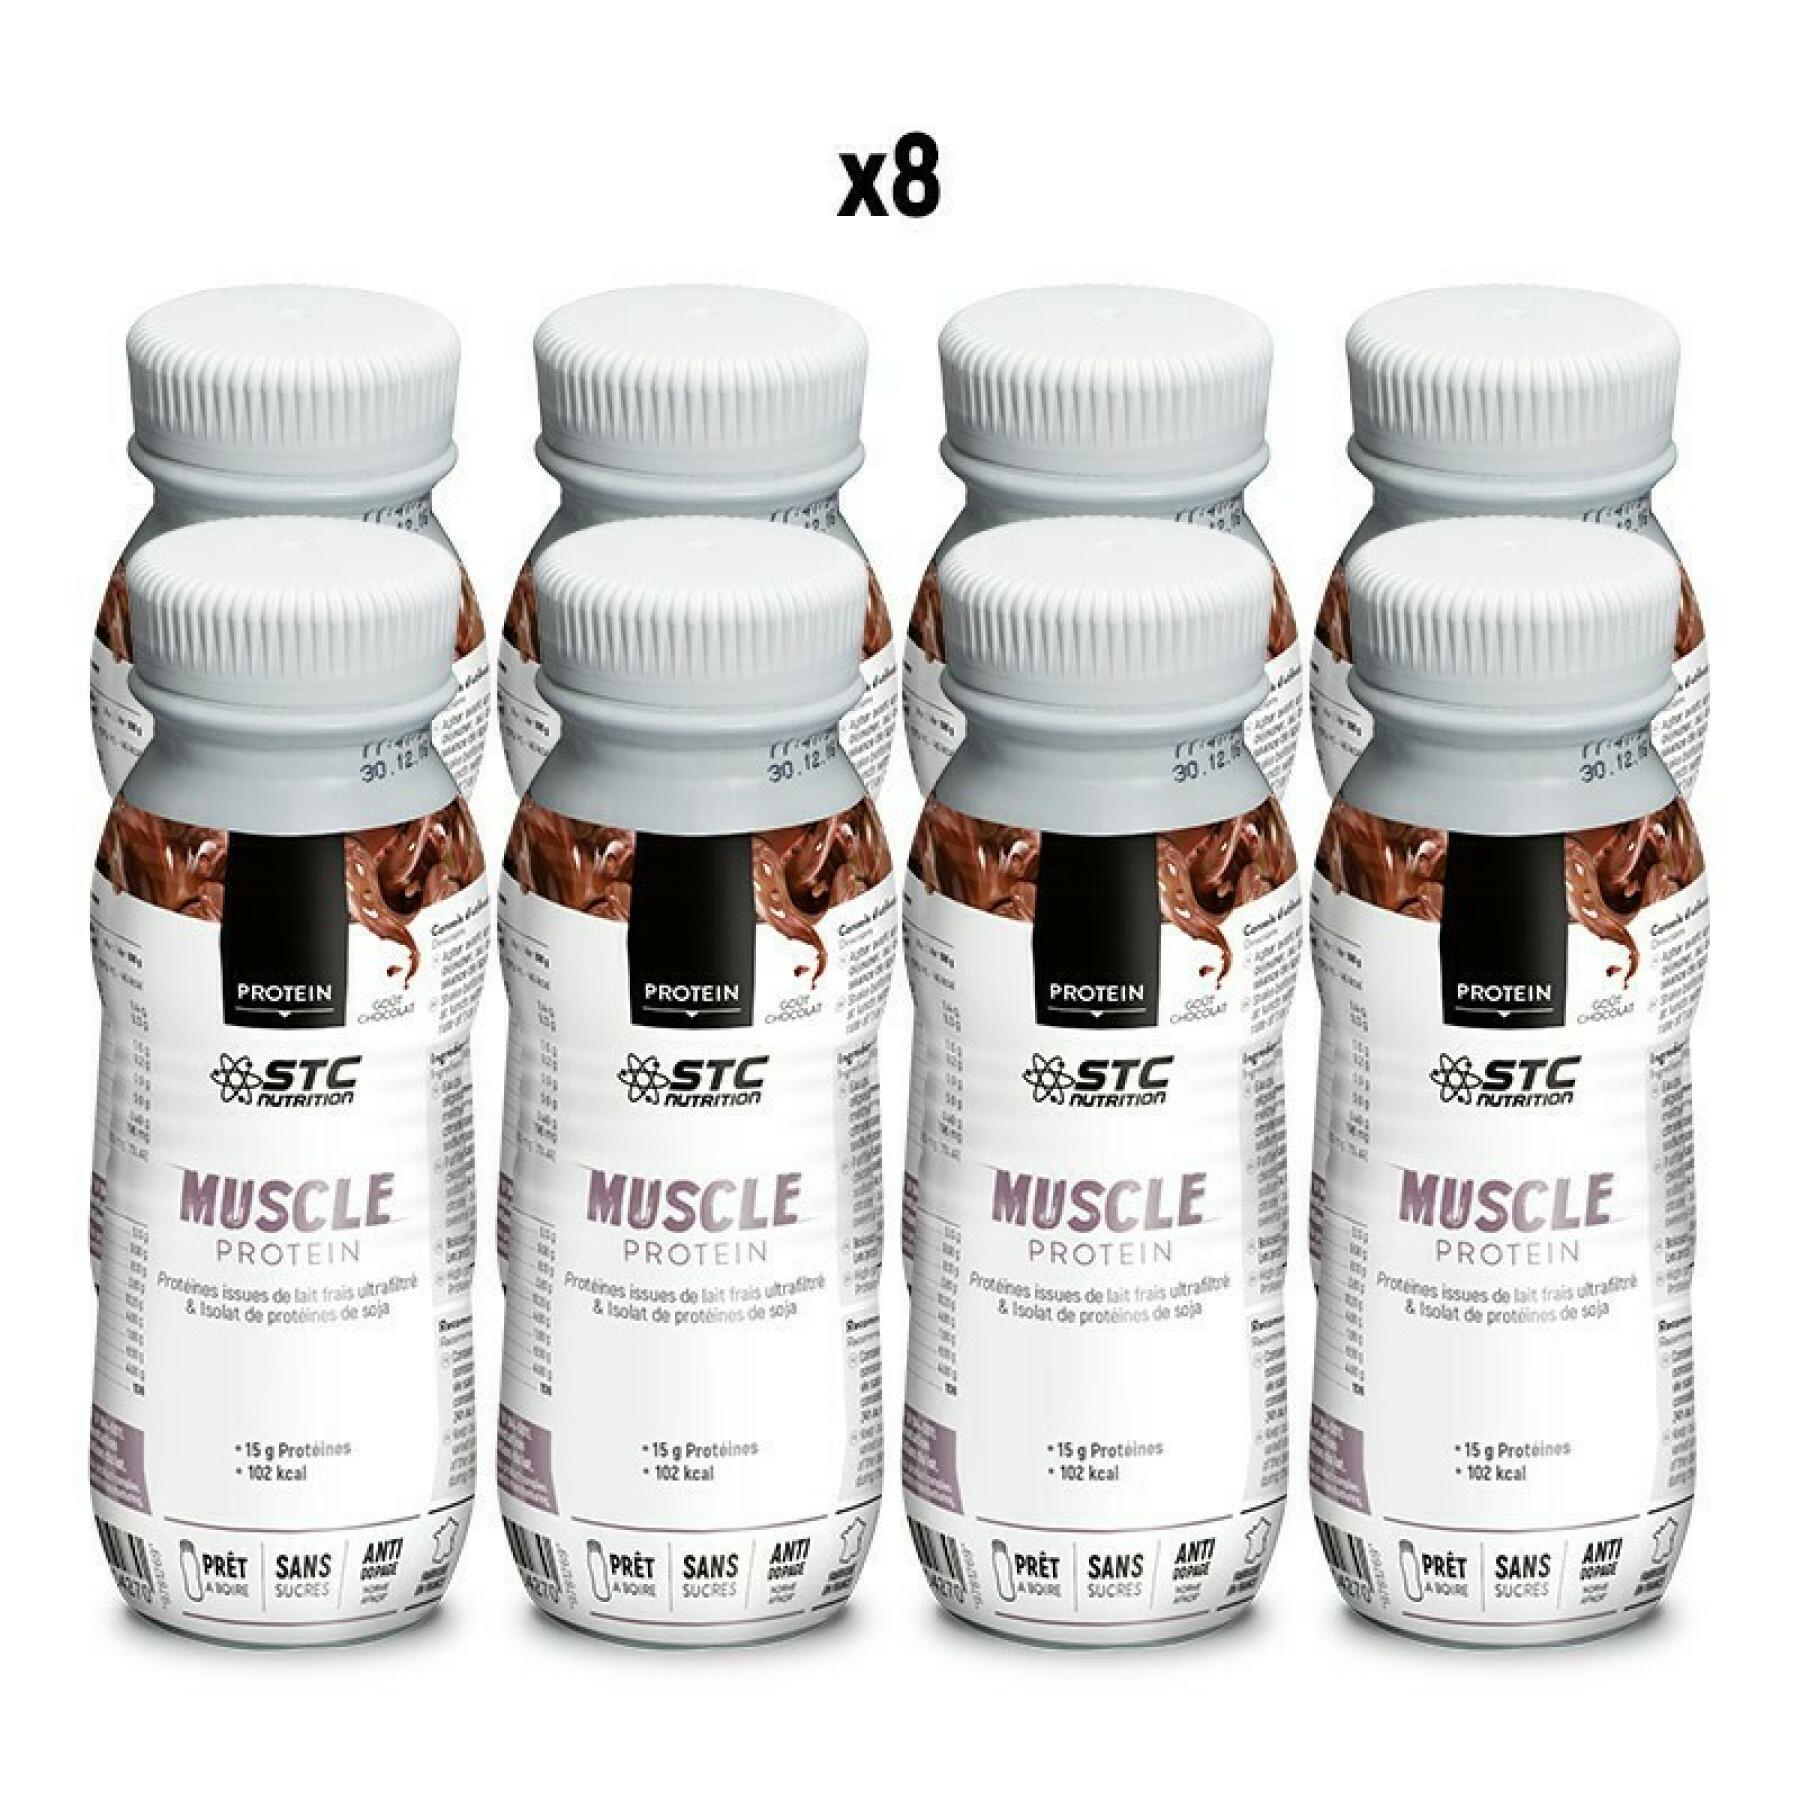 Ready-to-drink protein drink pack STC Nutrition - vanille - 8 bouteilles de 250ml